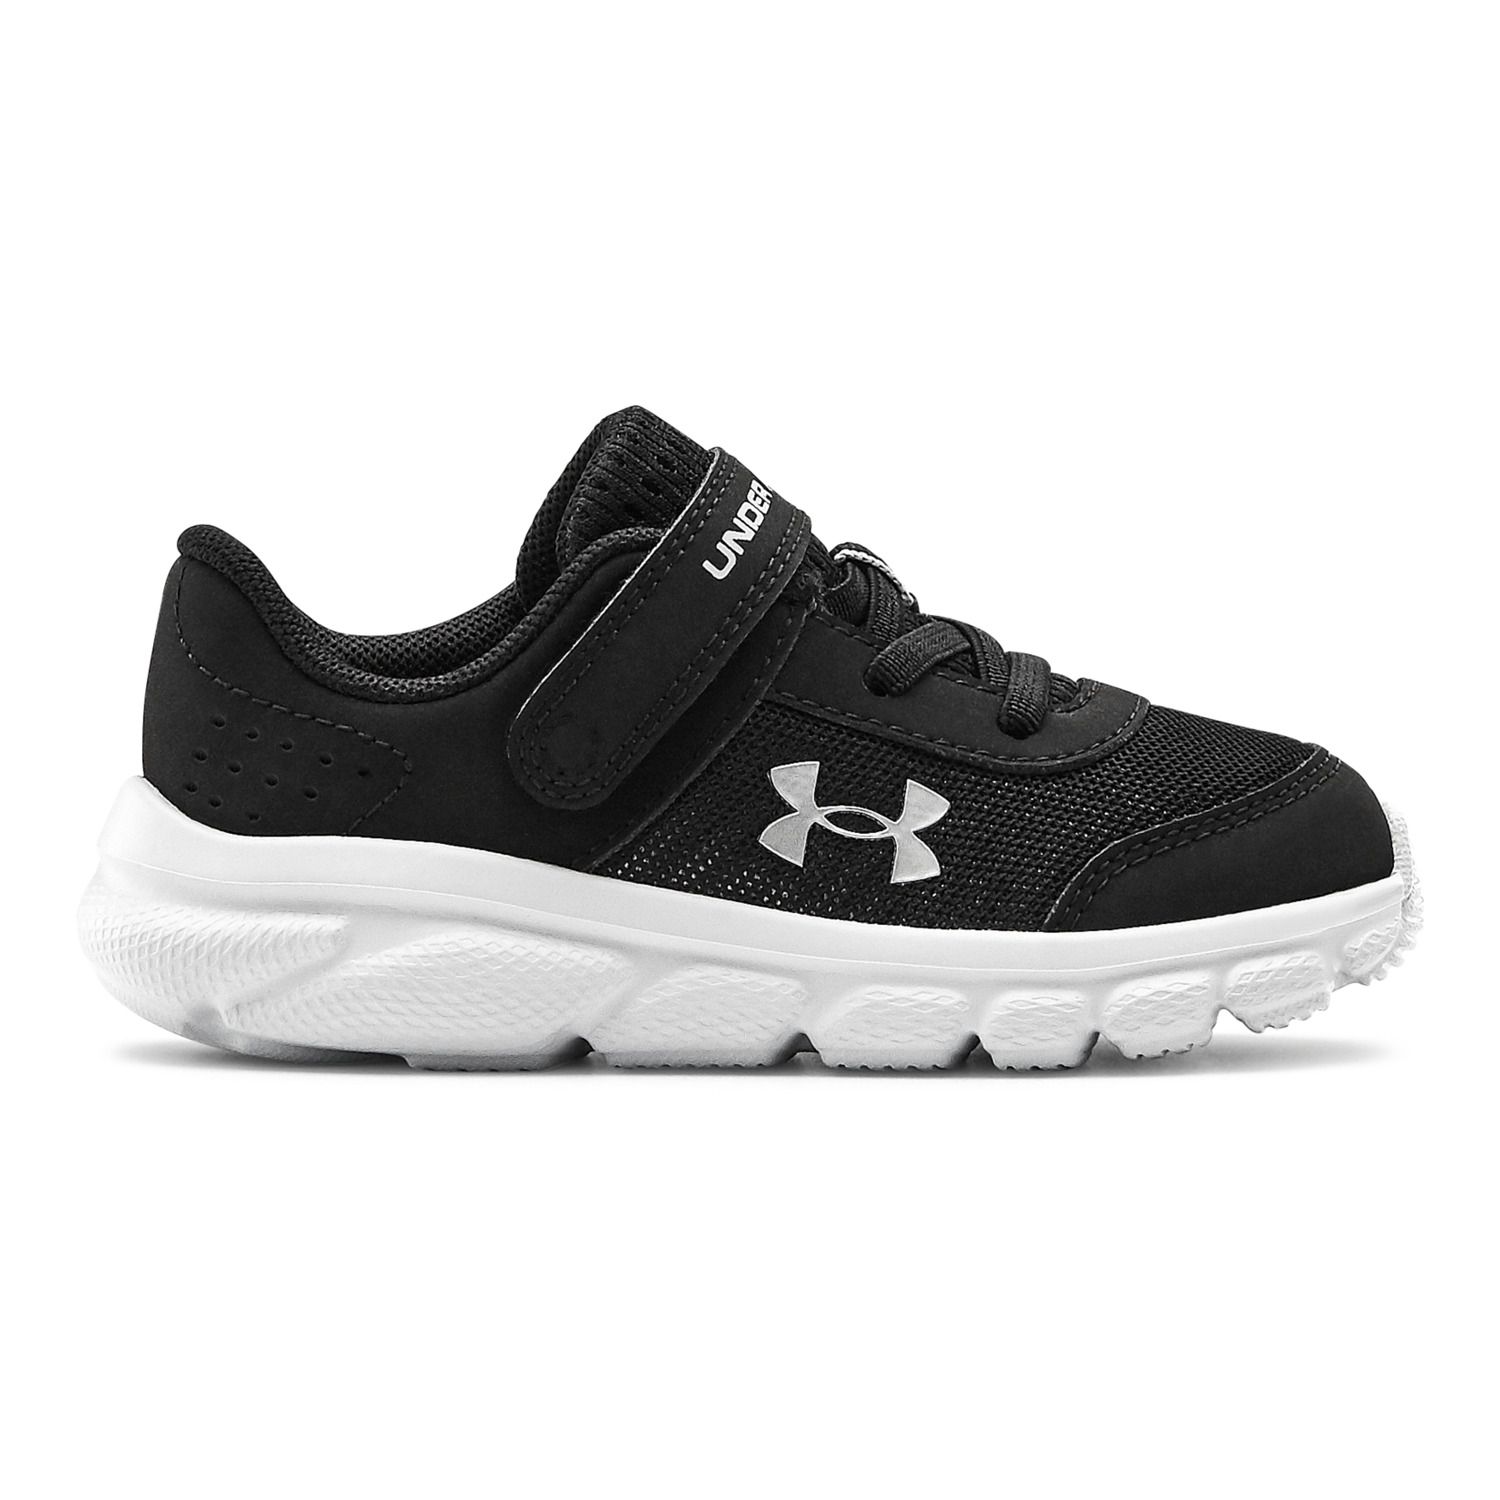 Boys' Under Armour Shoes: Kick His 